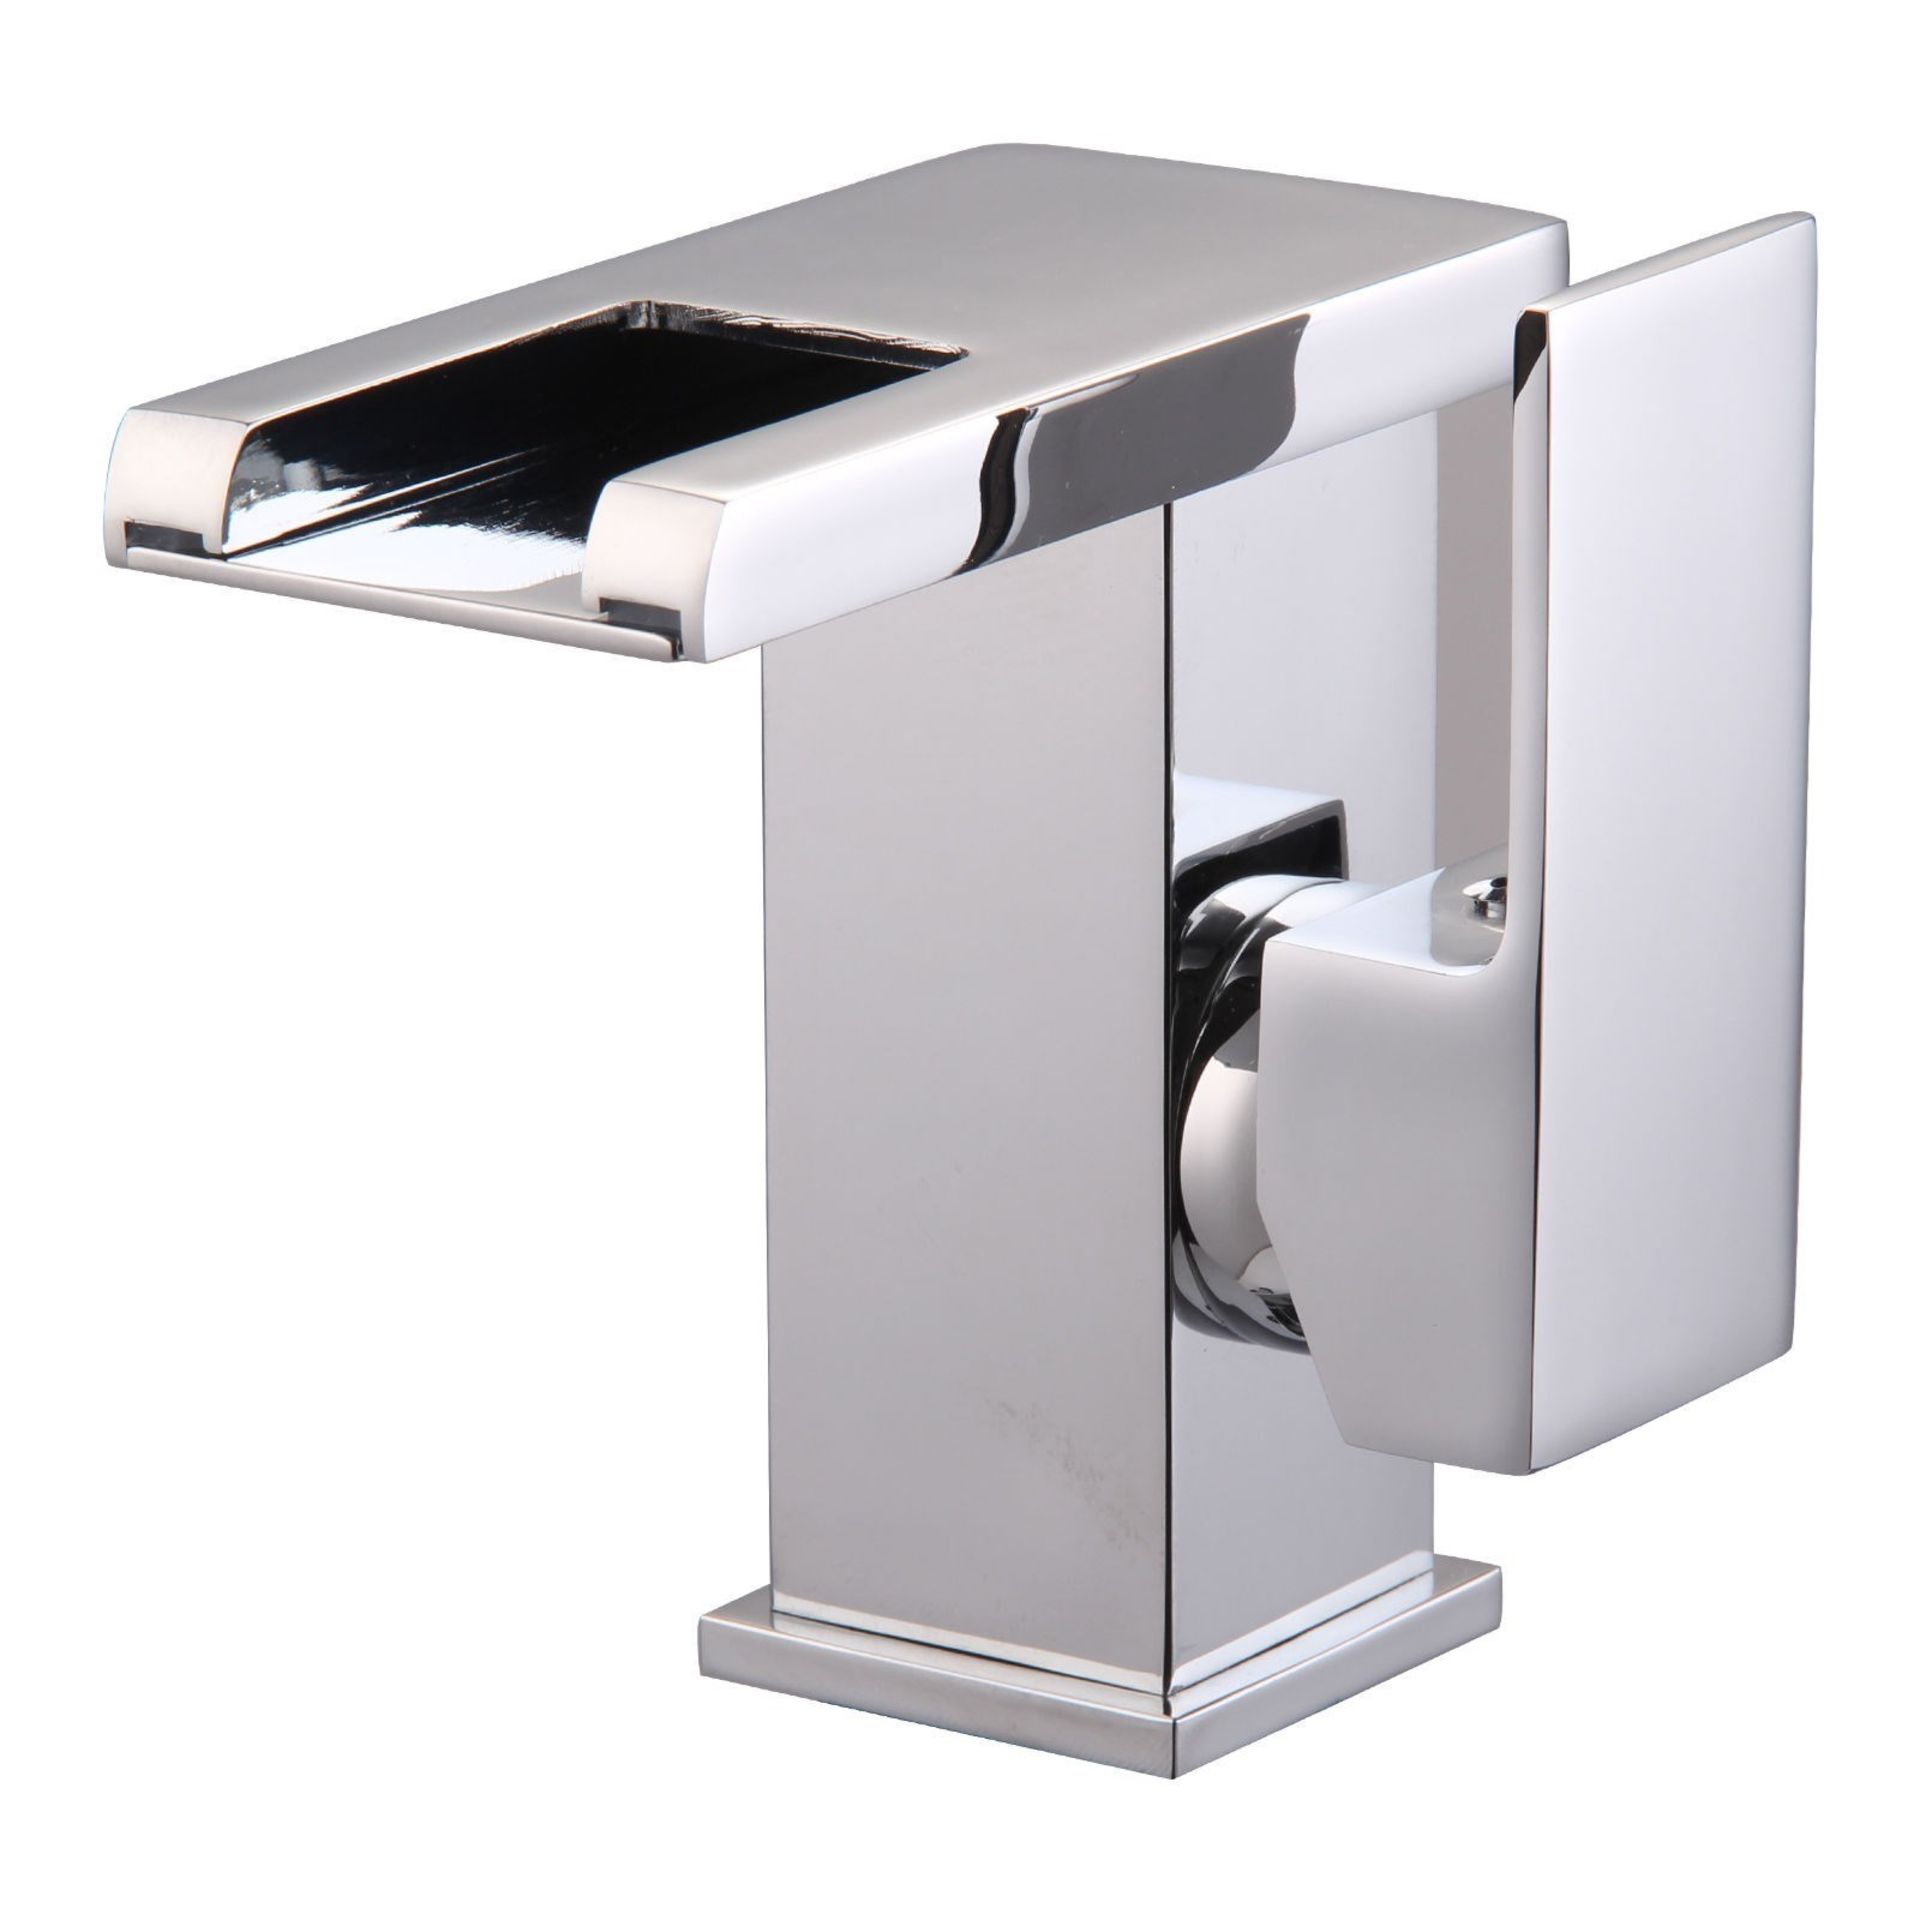 LED Waterfall Bathroom Basin Mixer Tap. RRP £229.99. Easy to install and clean. All copper mounting